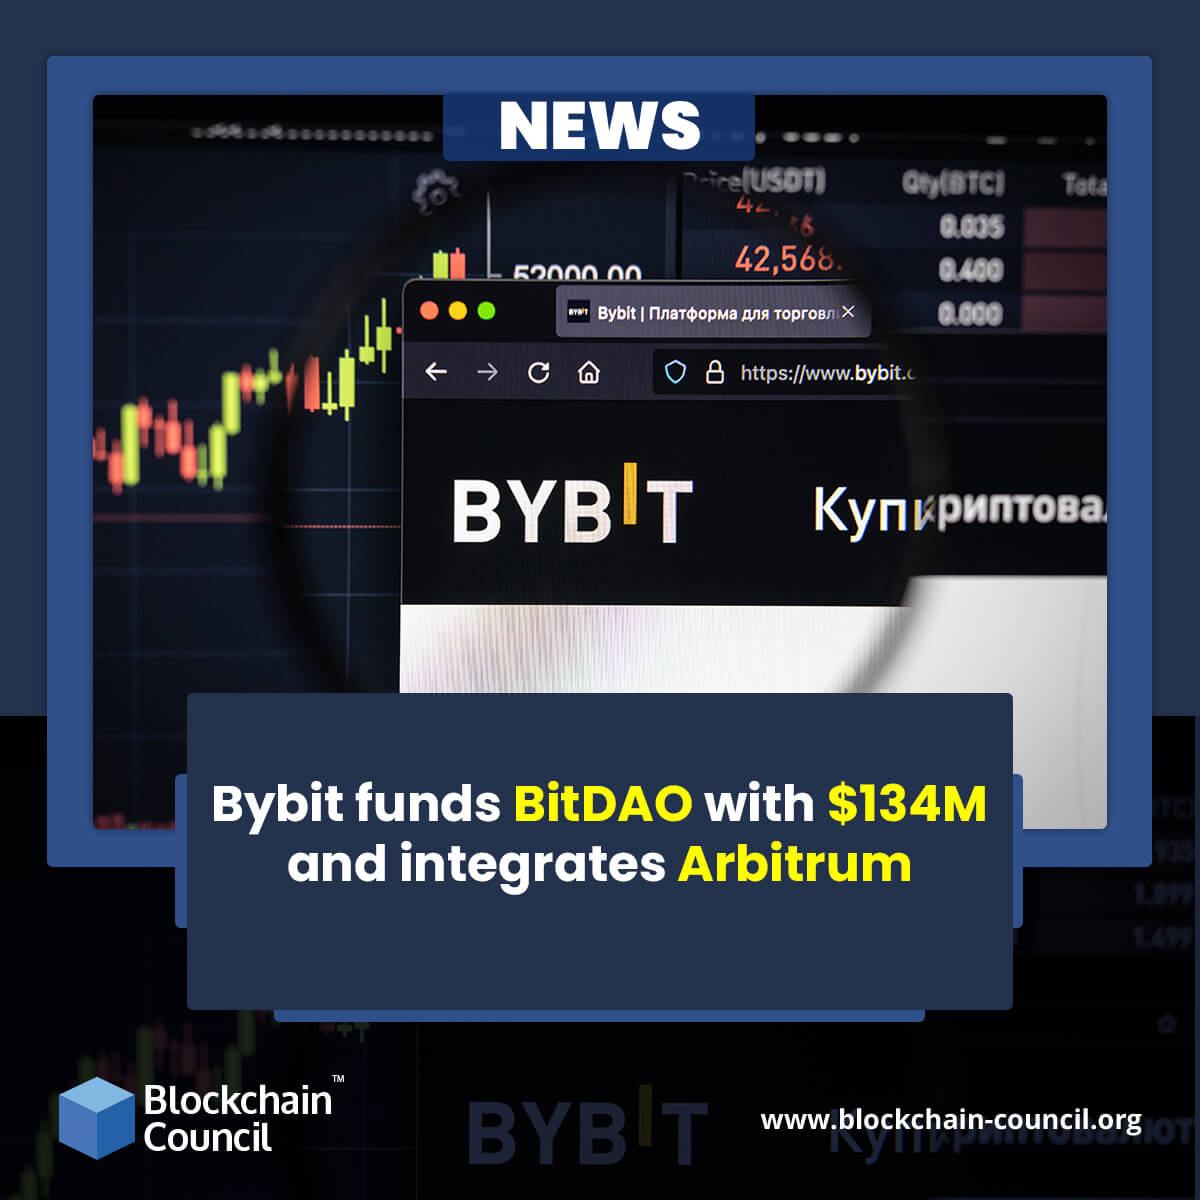 Bybit funds BitDAO with $134M and integrates Arbitrum